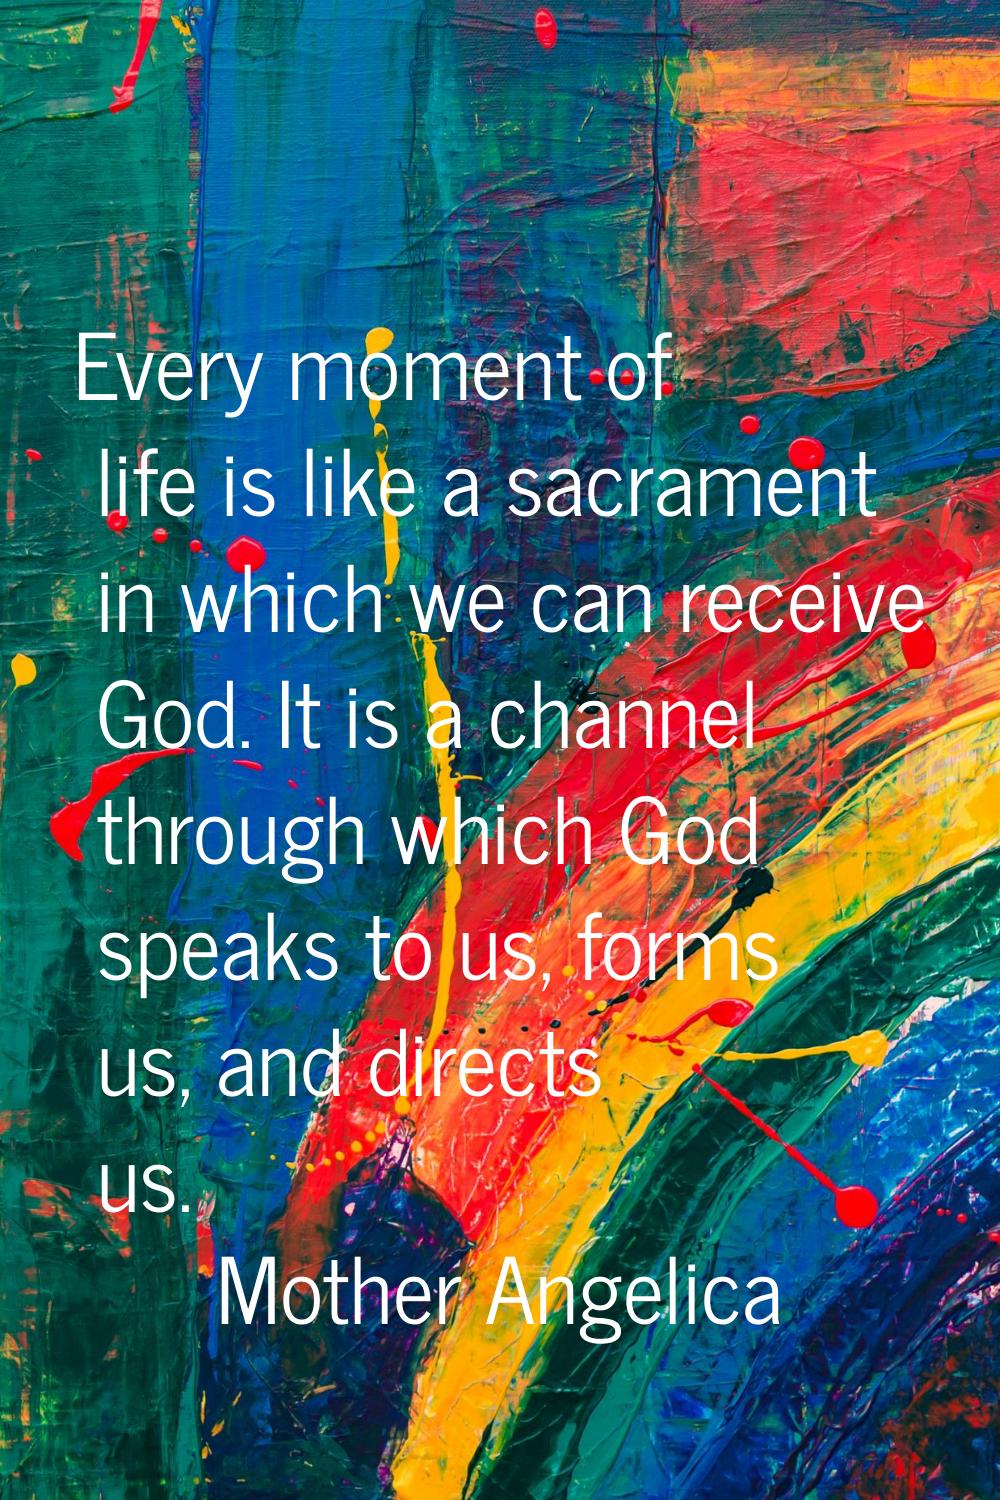 Every moment of life is like a sacrament in which we can receive God. It is a channel through which